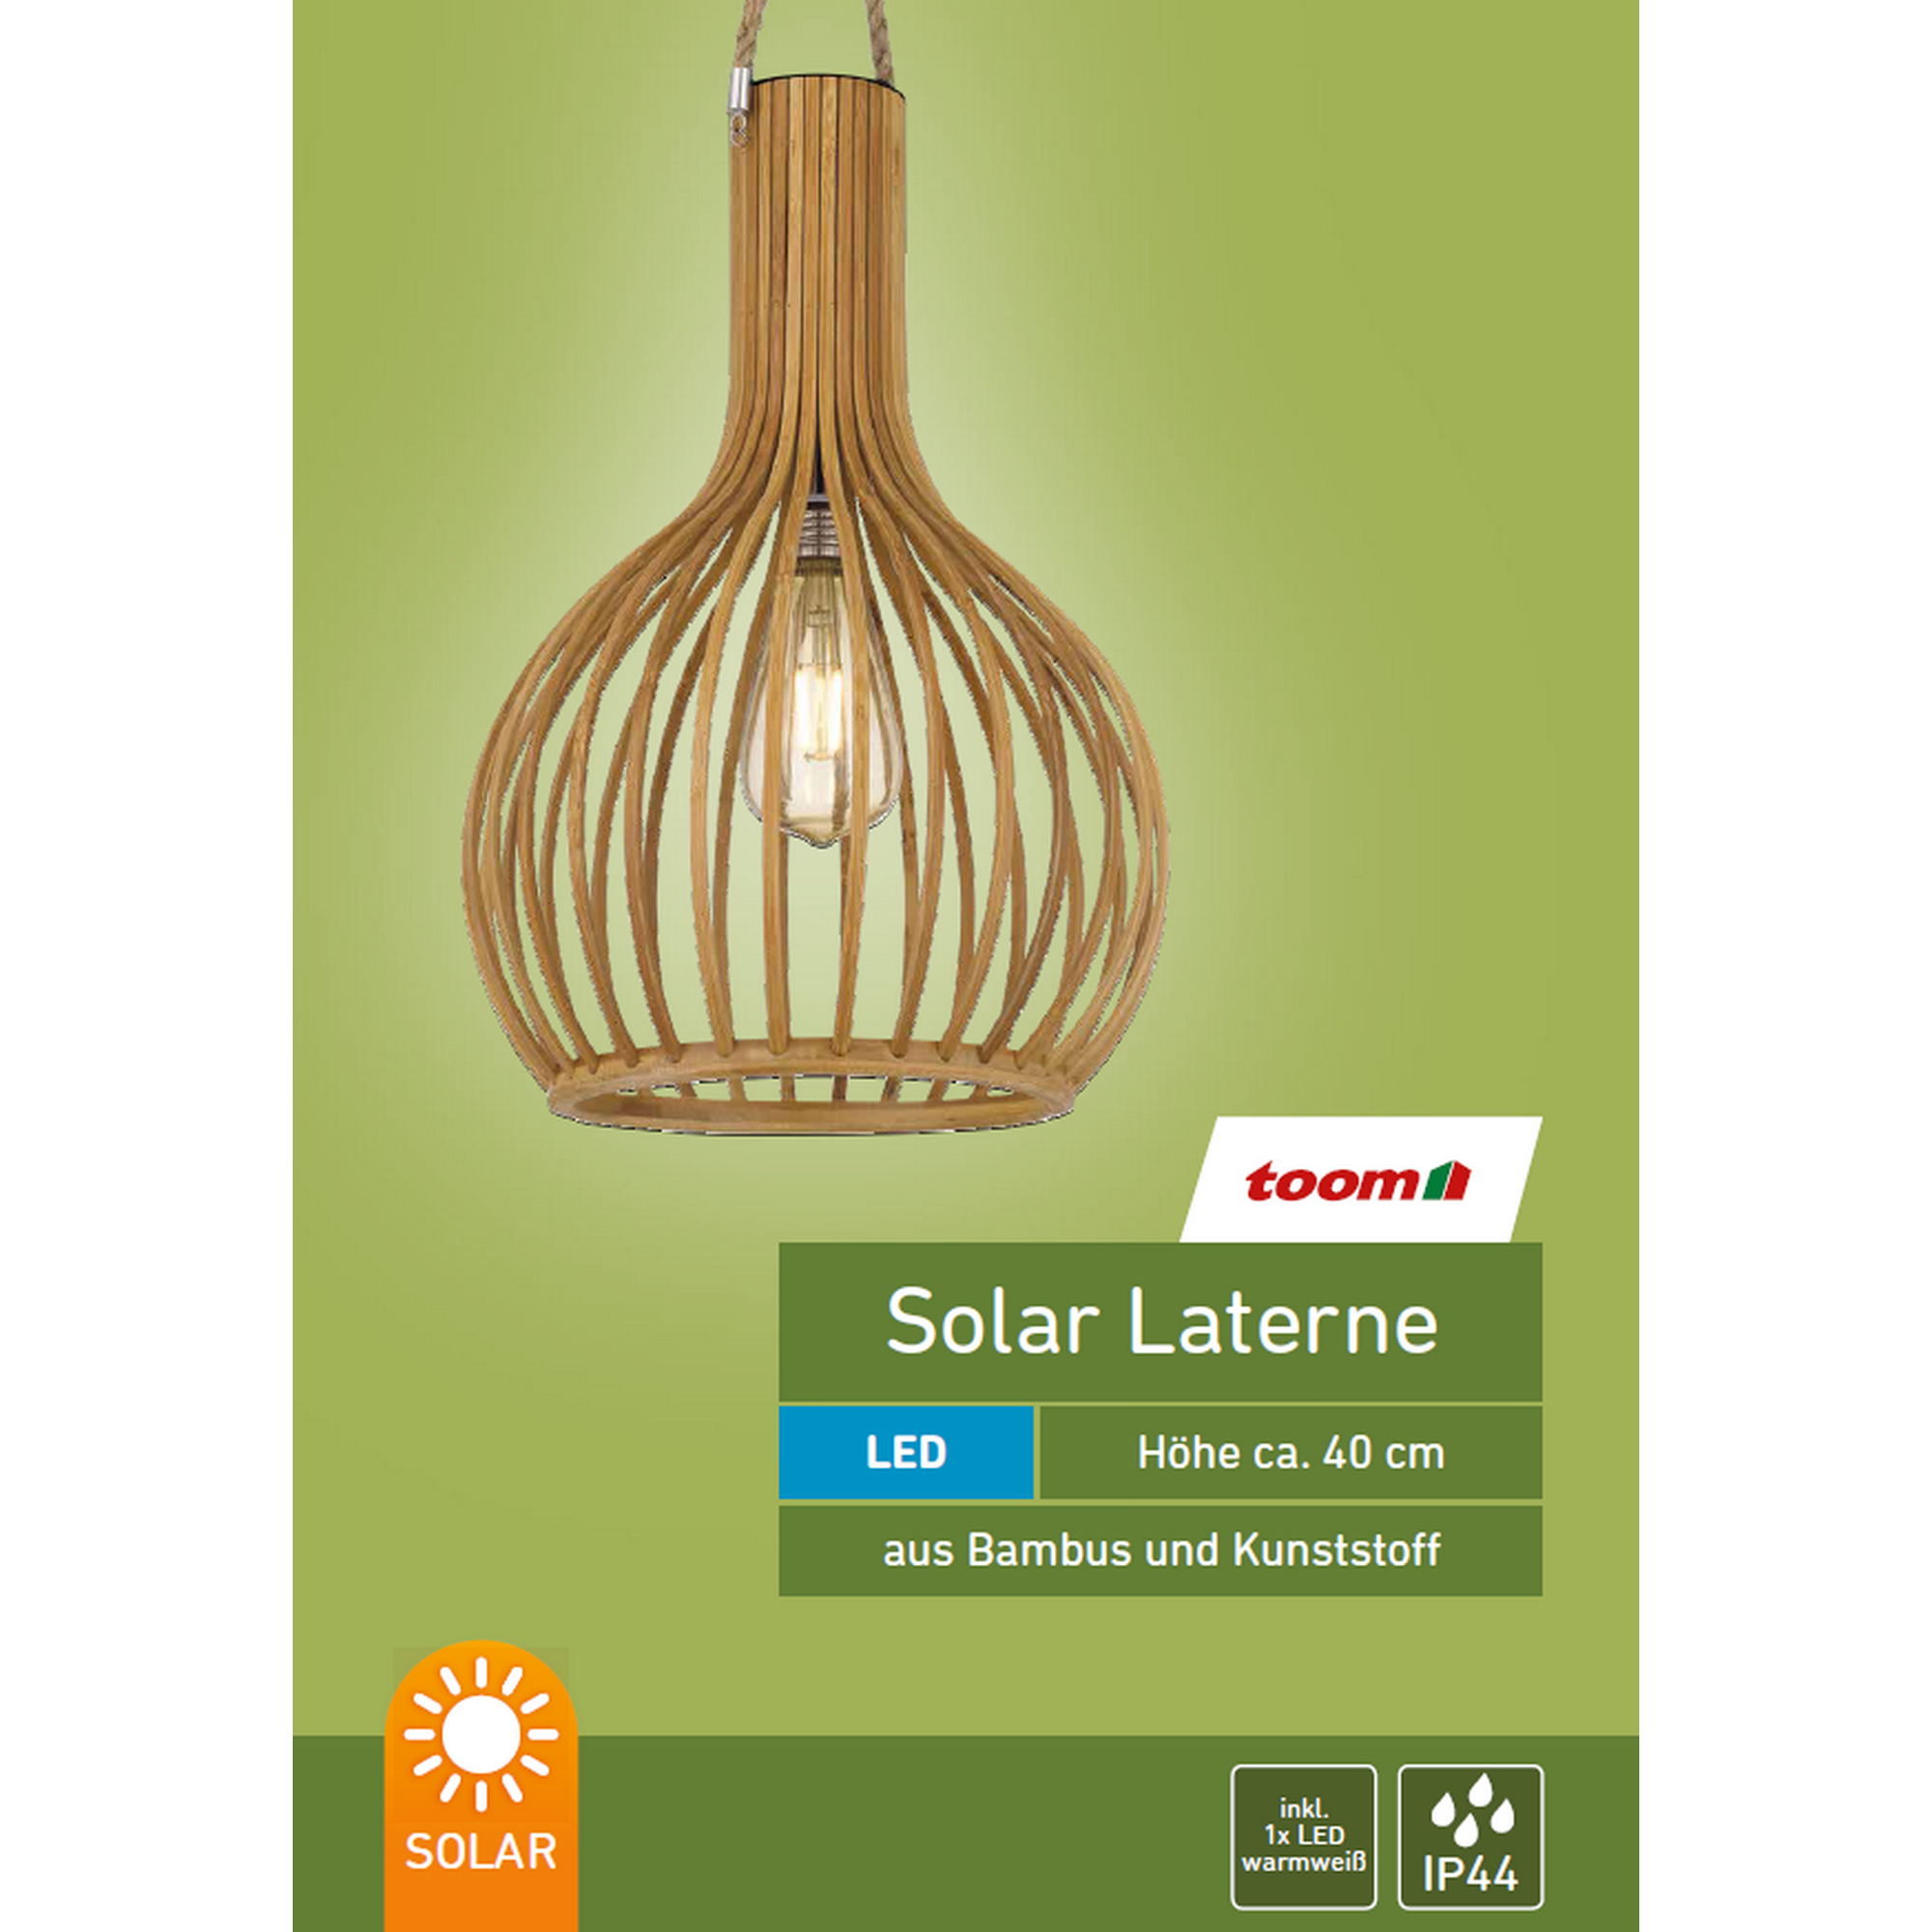 Solar-Laterne Bambus braun 27 x 40 cm + product picture